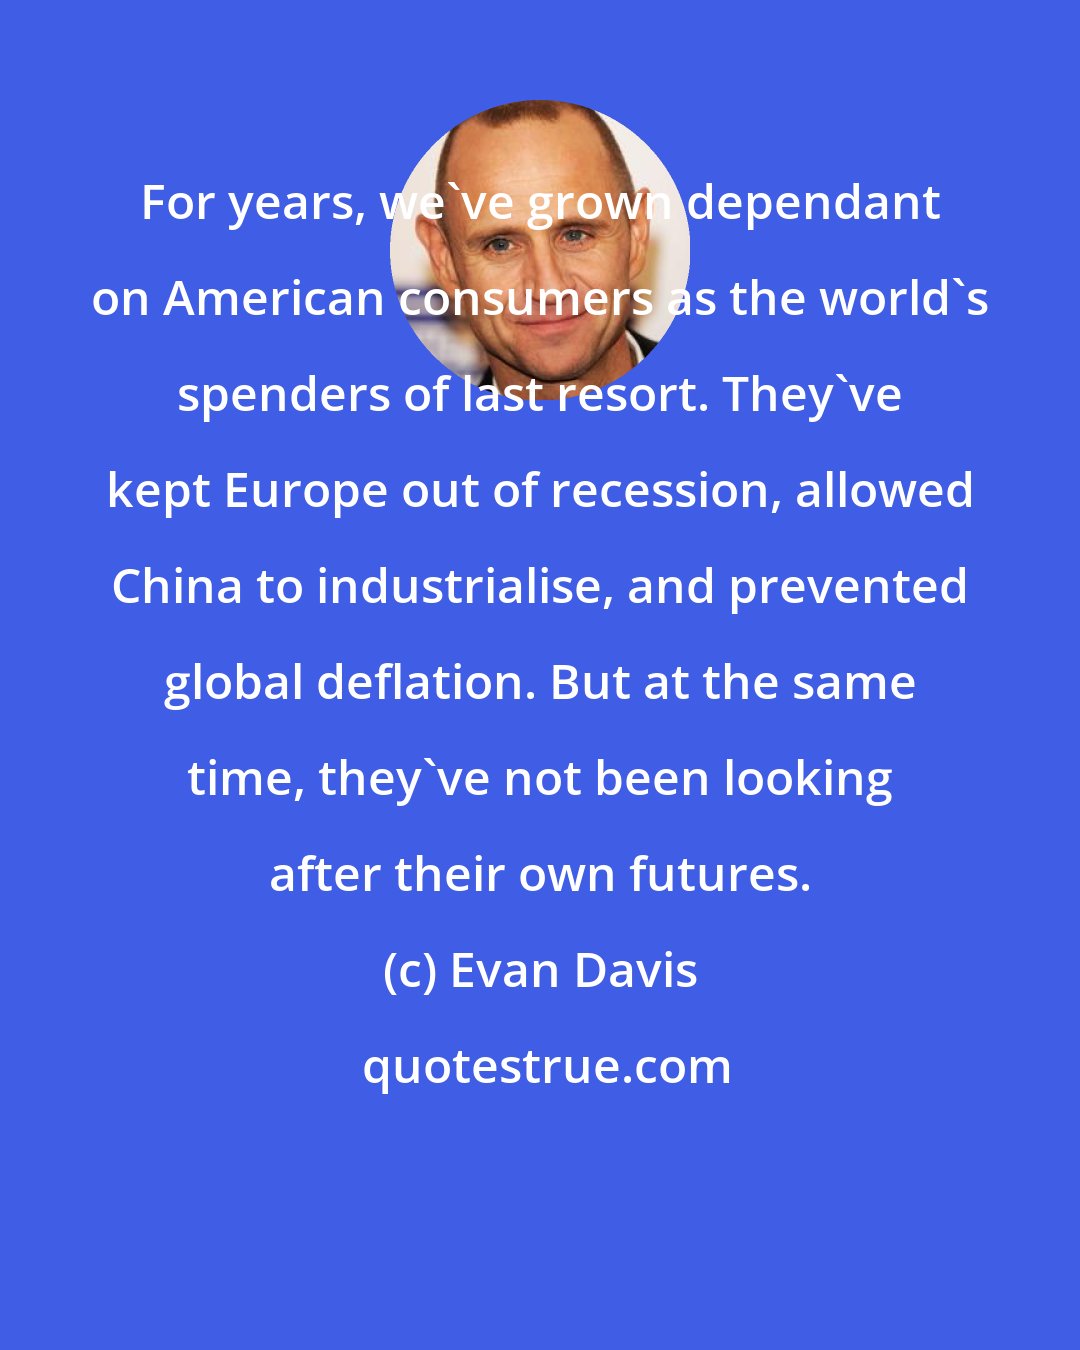 Evan Davis: For years, we've grown dependant on American consumers as the world's spenders of last resort. They've kept Europe out of recession, allowed China to industrialise, and prevented global deflation. But at the same time, they've not been looking after their own futures.